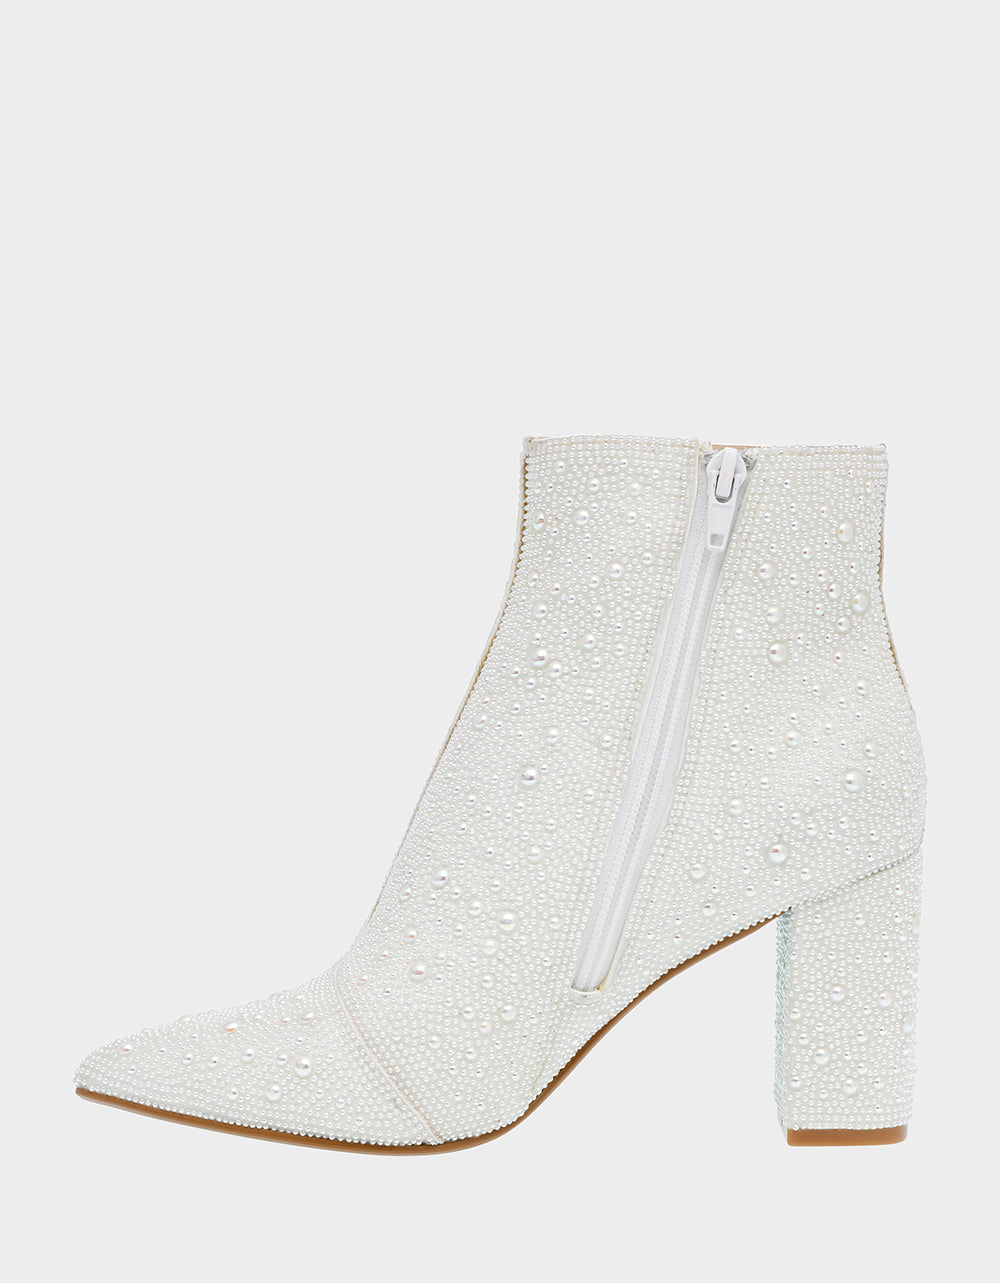 CADY IVORY Pearl Bootie | Pearl Rhinestone Booties | Women’s Boots ...